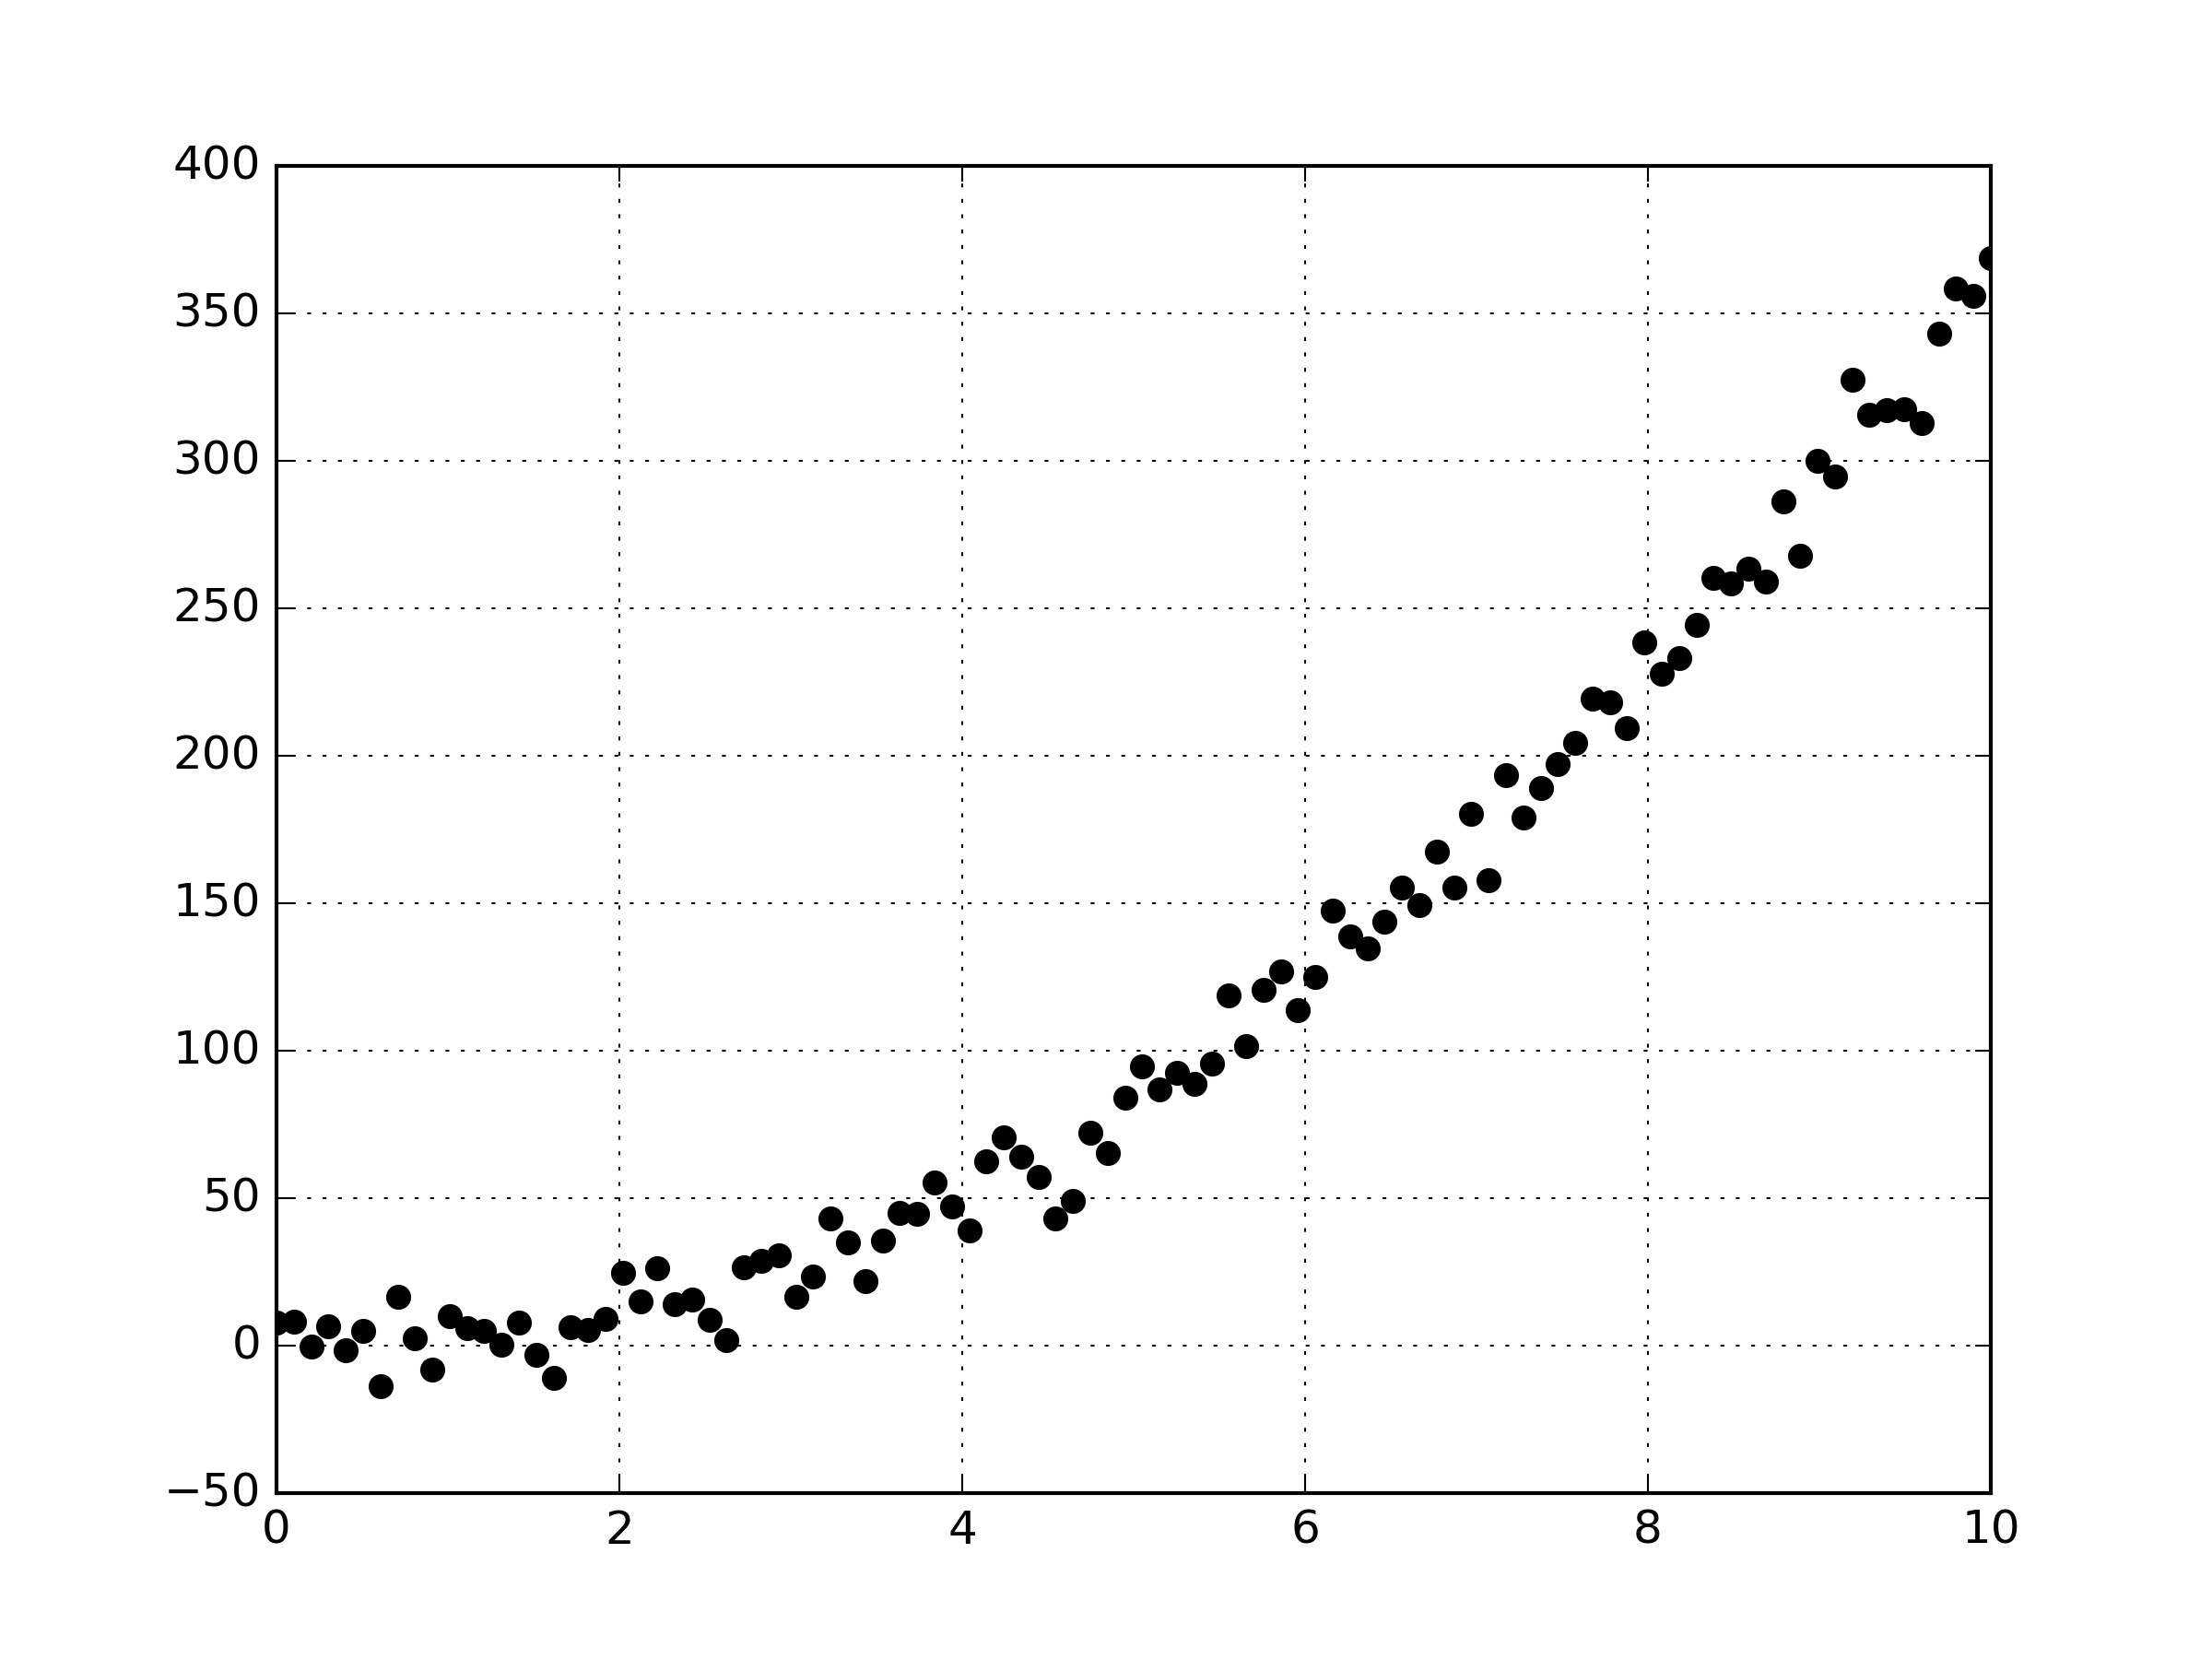 Image of the polynomial based data points with noise.